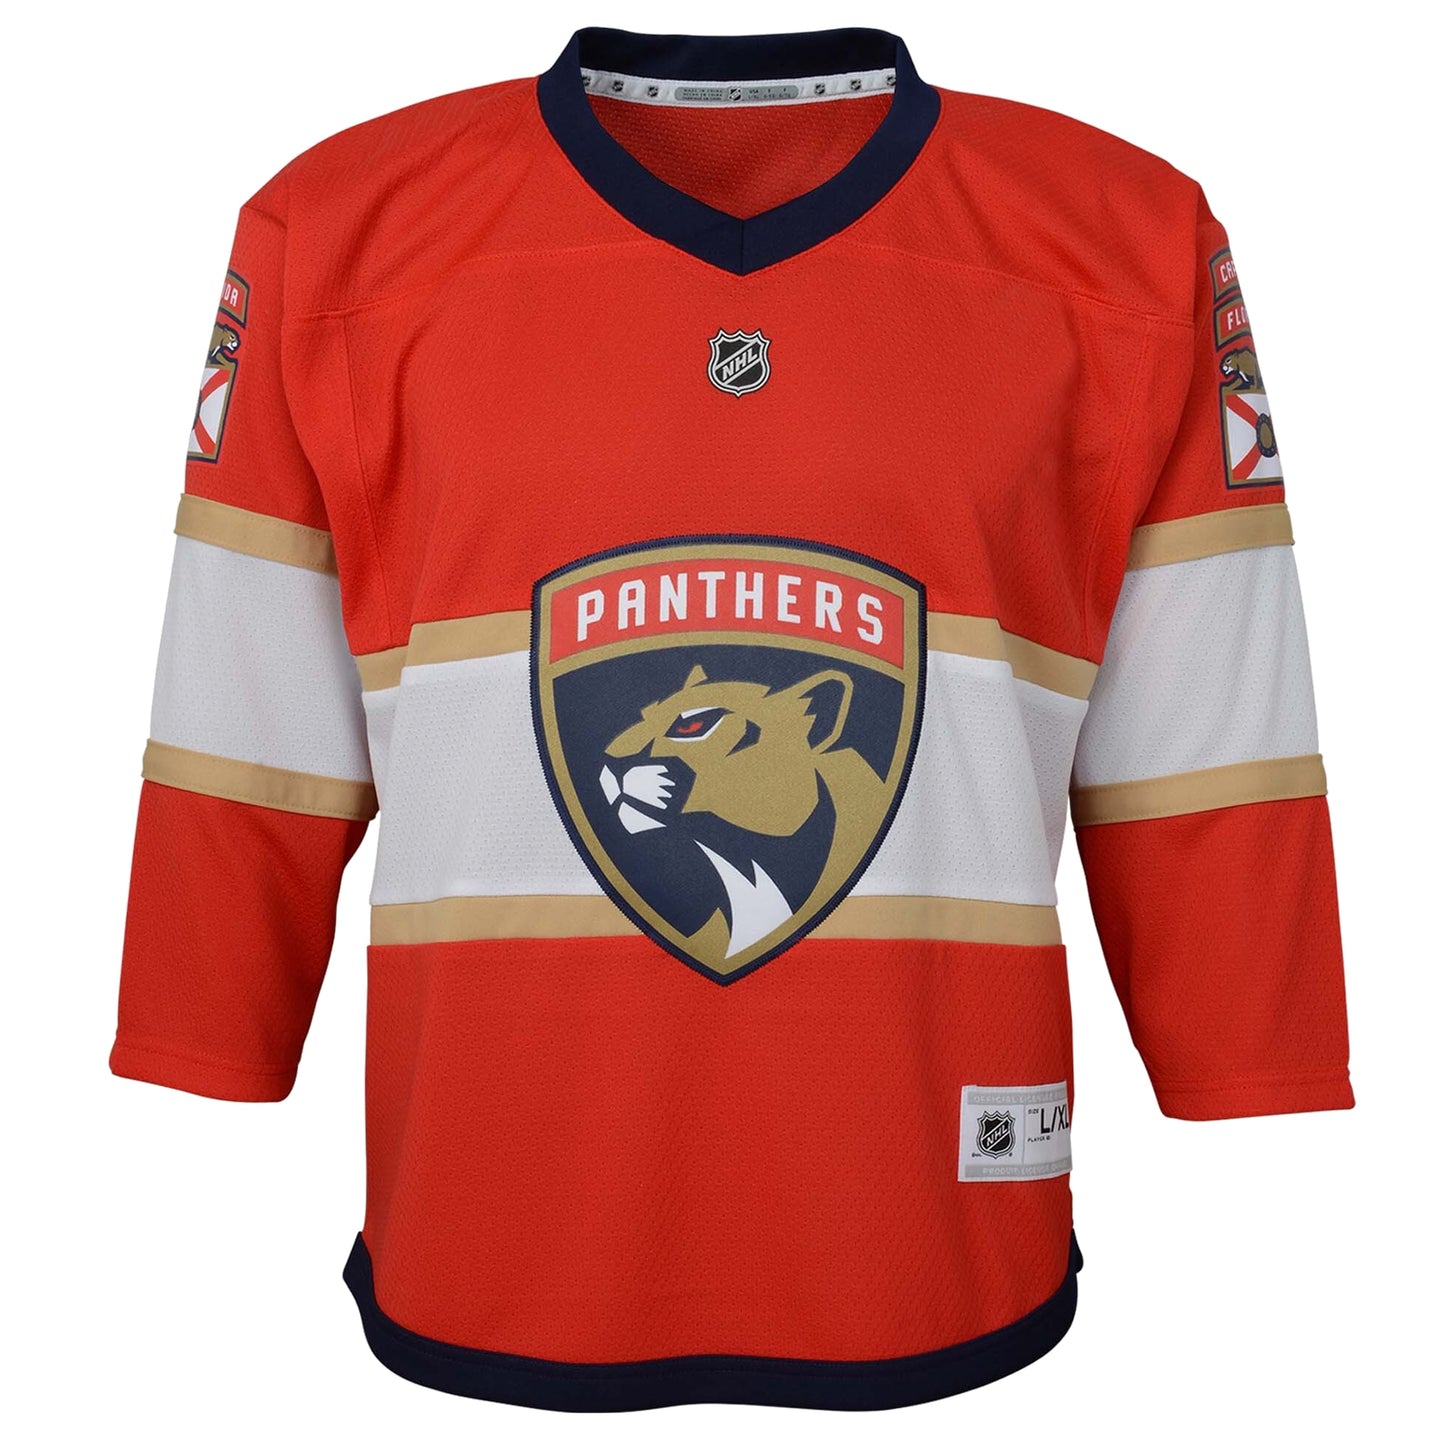 Florida Panthers Youth Home Replica Blank Jersey - Red